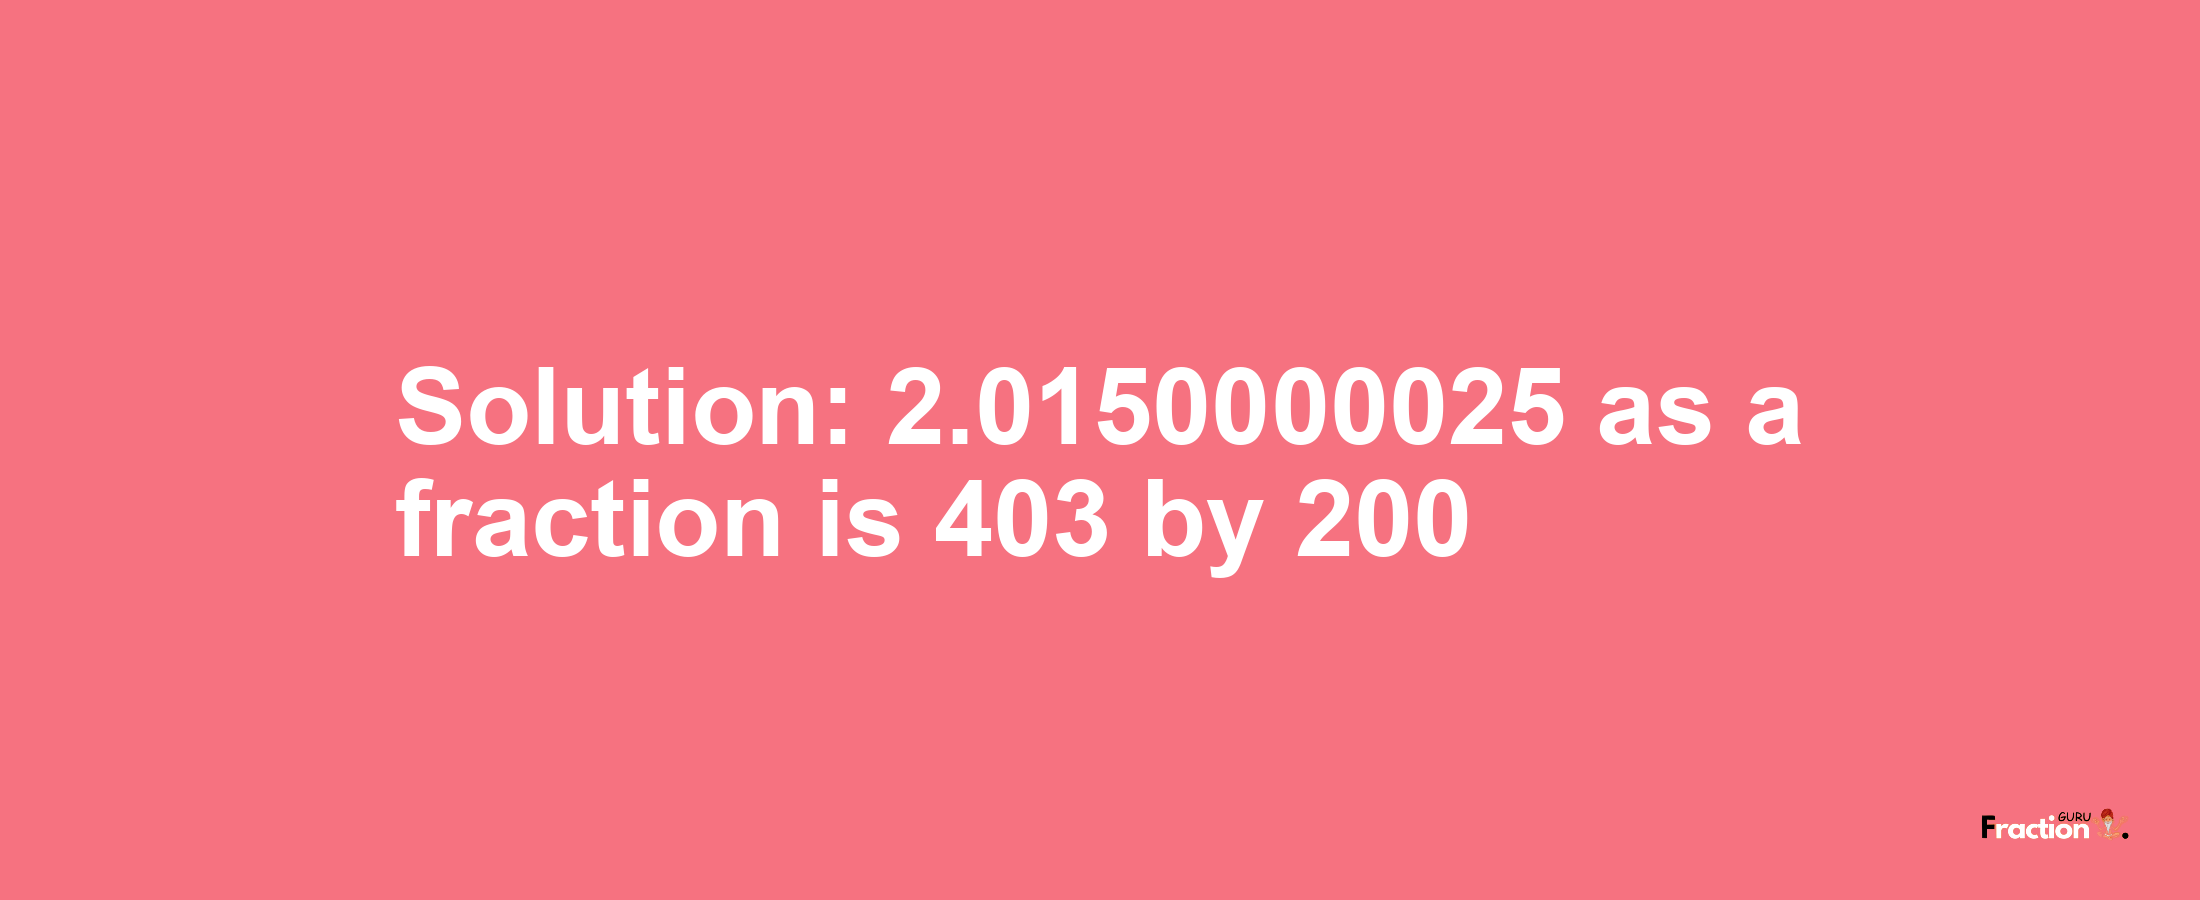 Solution:2.0150000025 as a fraction is 403/200